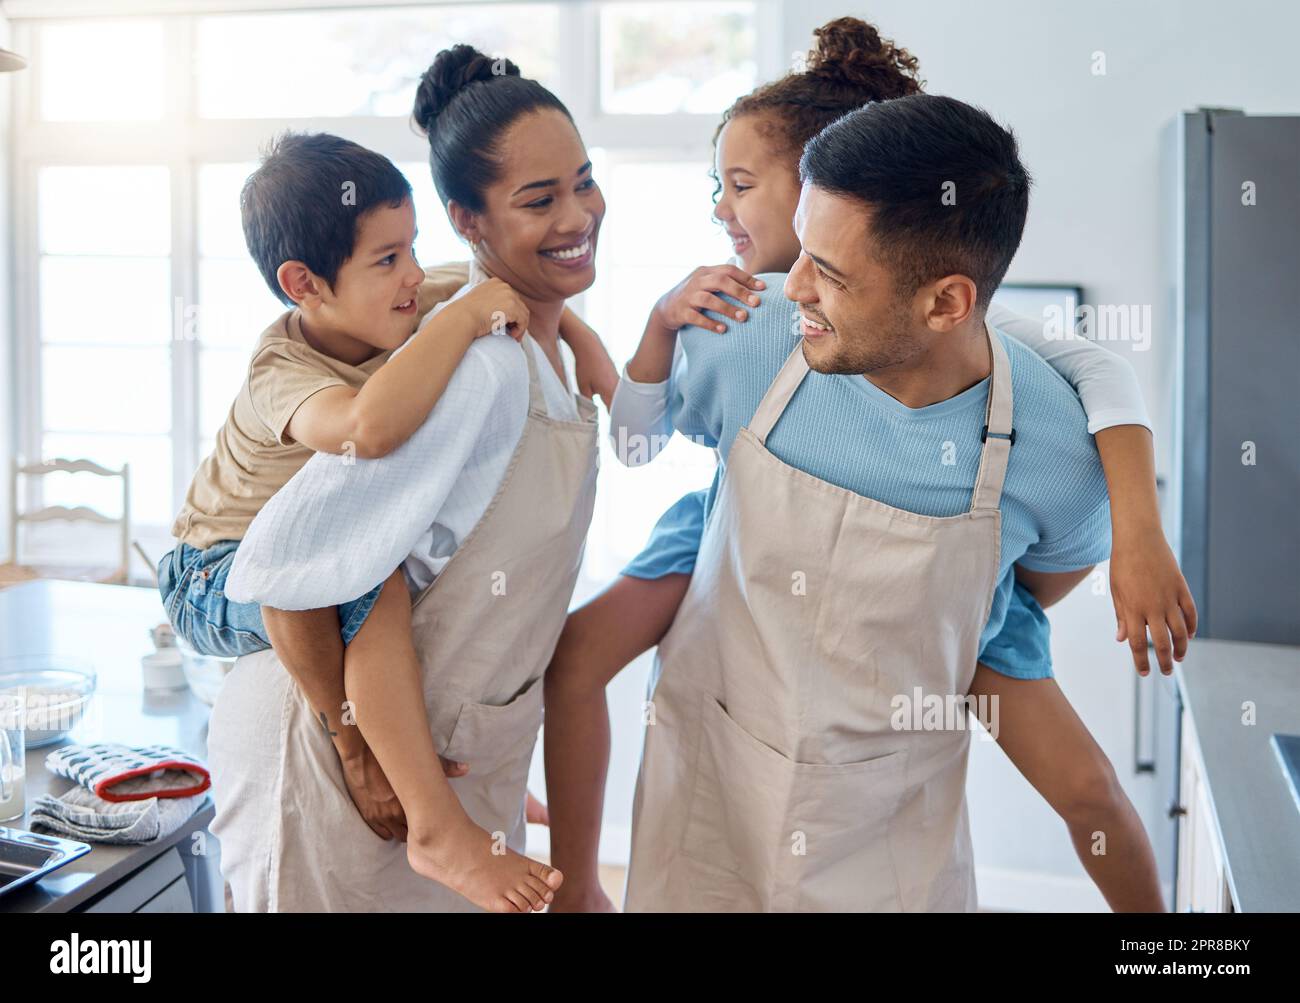 Energetic parents giving their children a piggyback ride while wearing aprons and baking in the kitchen. Hispanic mom and dad playing with kids at home Stock Photo